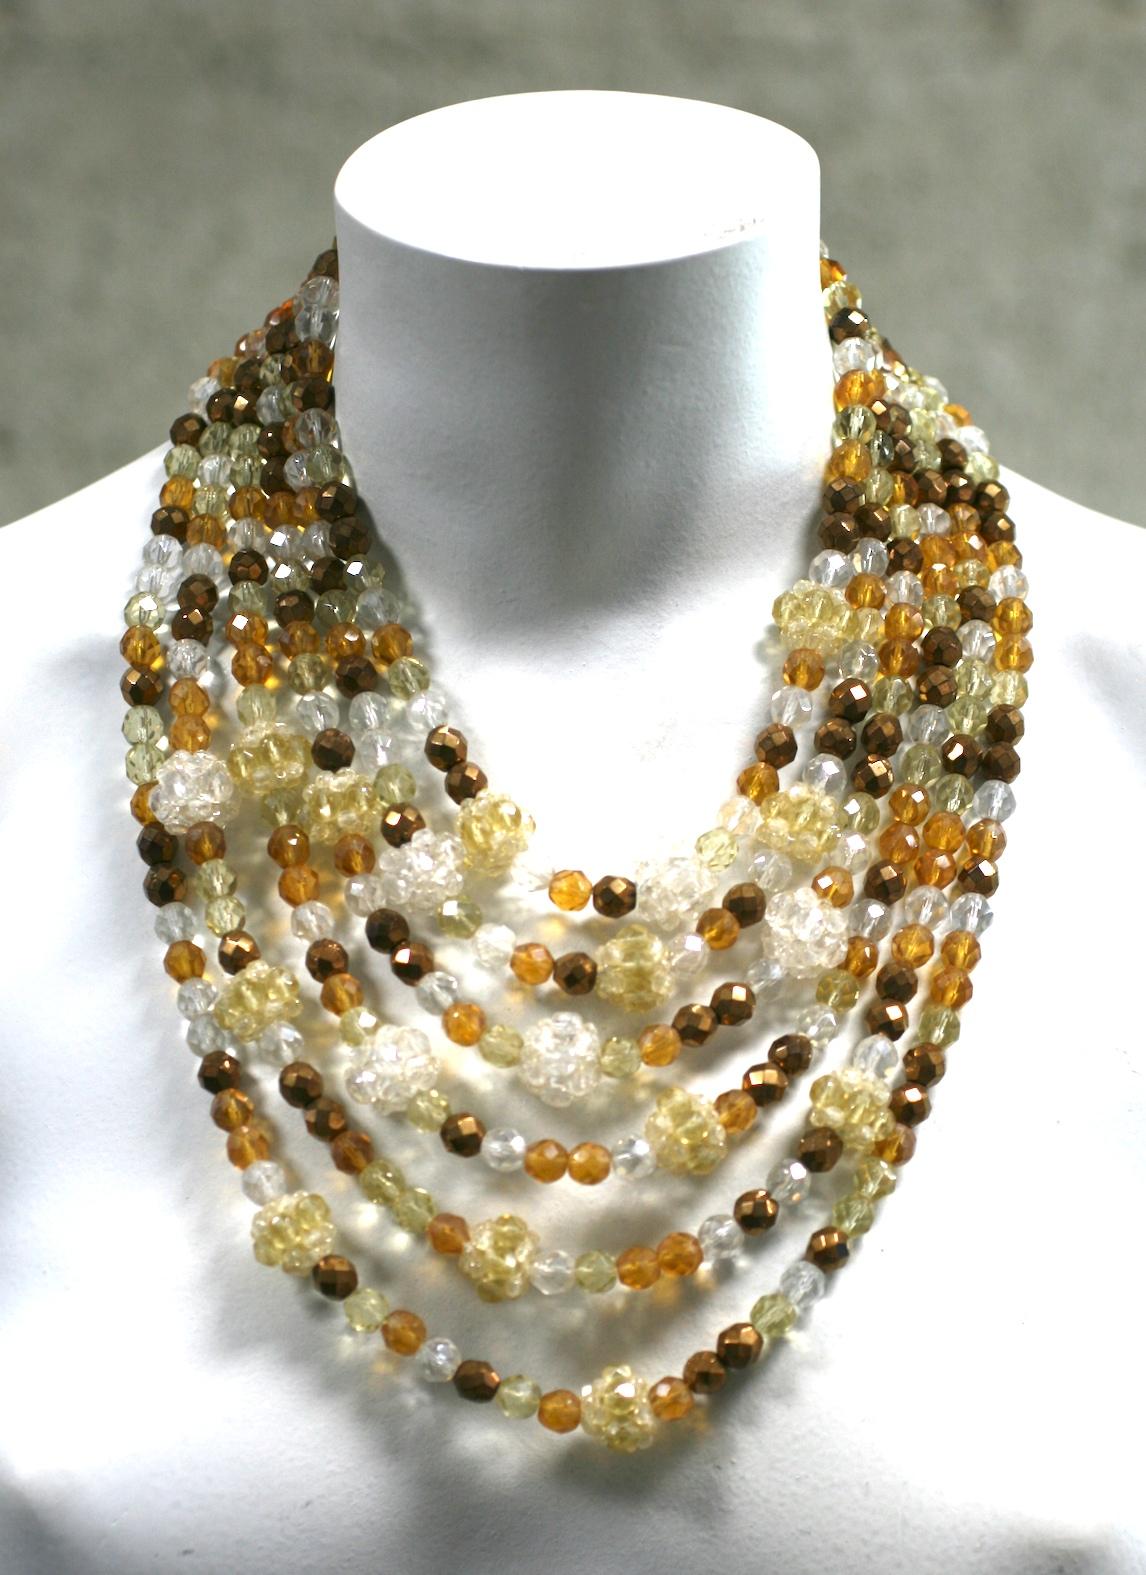 Exceptional Coppola Toppo Beaded Bib in tones of citrine and crystal mixed with copper flashed beads. Throughout the strands are interdispersed larger hand beaded spheres made of the same tonal crystals. Elaborate hand beaded clasp with signature.